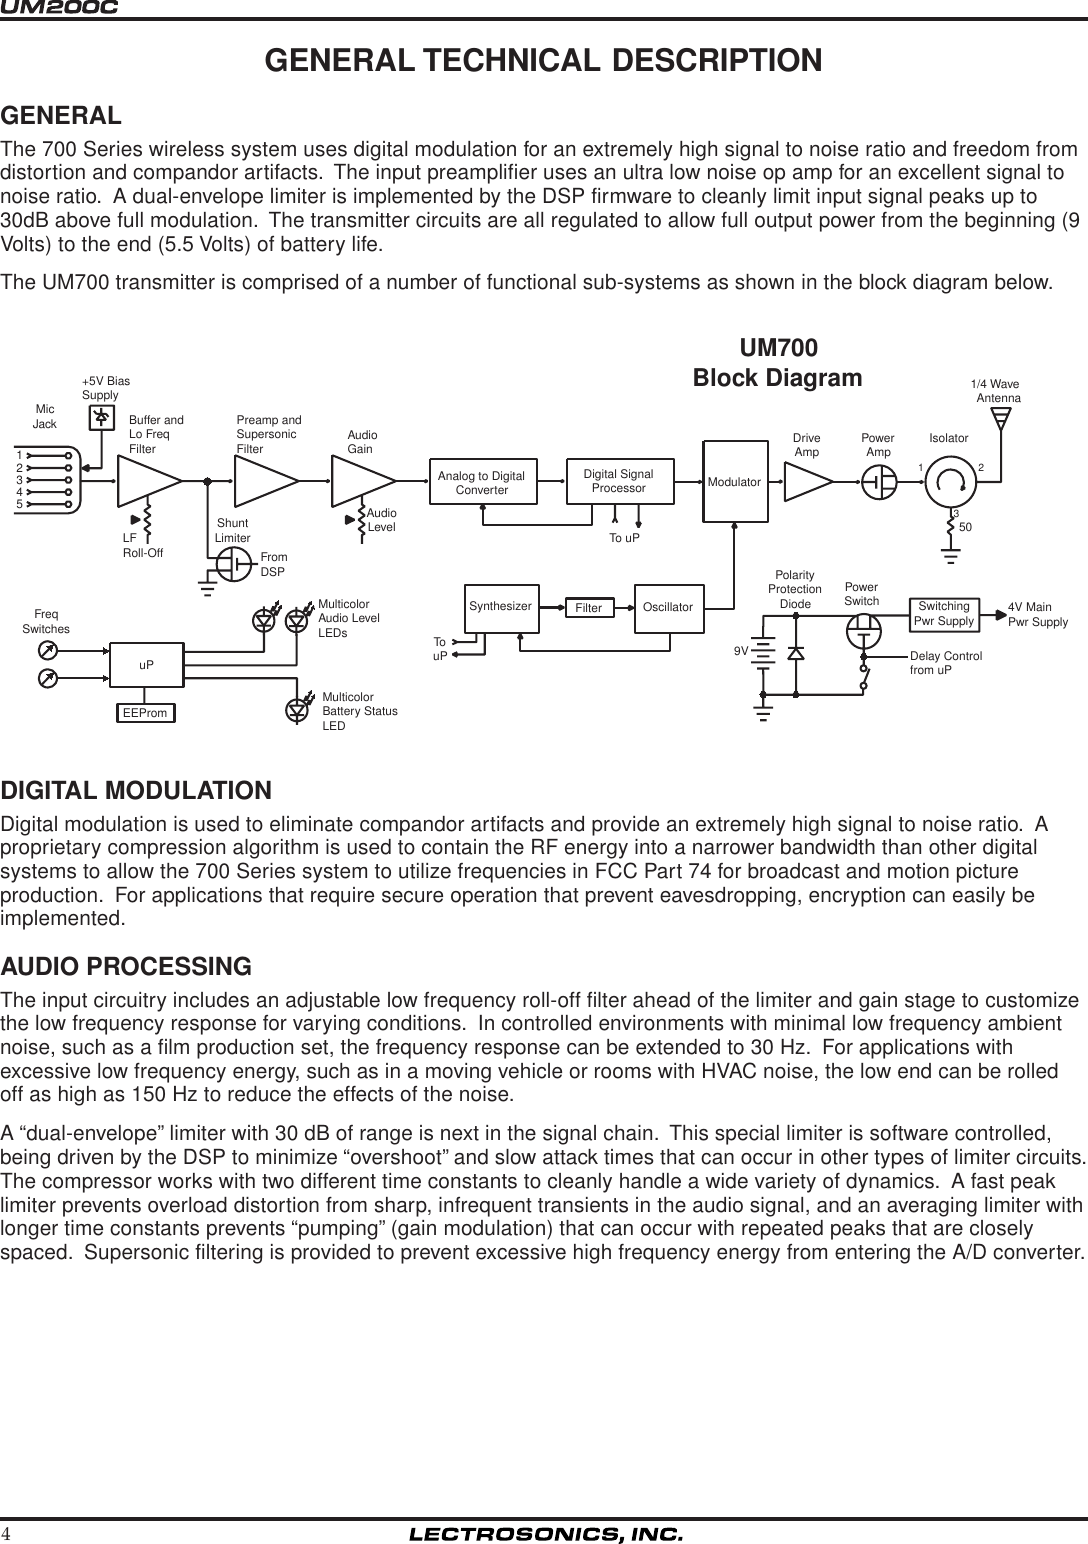 4UM700Block Diagram54321FreqSwitchesShuntLimiterFromDSPLFRoll-OffPreamp andSupersonicFilter AudioGain+5V BiasSupplyMicJack Buffer andLo FreqFilterAnalog to DigitalConverterDigital SignalProcessorTo uPModulatorDriveAmp PowerAmp1231/4 WaveAntenna50AudioLevelOscillatorFilterSynthesizerTouPuPEEPromMulticolorAudio LevelLEDsMulticolorBattery StatusLEDSwitchingPwr SupplyDelay Controlfrom uP9VPolarityProtectionDiodePowerSwitch 4V MainPwr SupplyIsolatorGENERAL TECHNICAL DESCRIPTIONGENERALThe 700 Series wireless system uses digital modulation for an extremely high signal to noise ratio and freedom fromdistortion and compandor artifacts.  The input preamplifier uses an ultra low noise op amp for an excellent signal tonoise ratio.  A dual-envelope limiter is implemented by the DSP firmware to cleanly limit input signal peaks up to30dB above full modulation.  The transmitter circuits are all regulated to allow full output power from the beginning (9Volts) to the end (5.5 Volts) of battery life.The UM700 transmitter is comprised of a number of functional sub-systems as shown in the block diagram below.DIGITAL MODULATIONDigital modulation is used to eliminate compandor artifacts and provide an extremely high signal to noise ratio.  Aproprietary compression algorithm is used to contain the RF energy into a narrower bandwidth than other digitalsystems to allow the 700 Series system to utilize frequencies in FCC Part 74 for broadcast and motion pictureproduction.  For applications that require secure operation that prevent eavesdropping, encryption can easily beimplemented.AUDIO PROCESSINGThe input circuitry includes an adjustable low frequency roll-off filter ahead of the limiter and gain stage to customizethe low frequency response for varying conditions.  In controlled environments with minimal low frequency ambientnoise, such as a film production set, the frequency response can be extended to 30 Hz.  For applications withexcessive low frequency energy, such as in a moving vehicle or rooms with HVAC noise, the low end can be rolledoff as high as 150 Hz to reduce the effects of the noise.A “dual-envelope” limiter with 30 dB of range is next in the signal chain.  This special limiter is software controlled,being driven by the DSP to minimize “overshoot” and slow attack times that can occur in other types of limiter circuits.The compressor works with two different time constants to cleanly handle a wide variety of dynamics.  A fast peaklimiter prevents overload distortion from sharp, infrequent transients in the audio signal, and an averaging limiter withlonger time constants prevents “pumping” (gain modulation) that can occur with repeated peaks that are closelyspaced.  Supersonic filtering is provided to prevent excessive high frequency energy from entering the A/D converter.